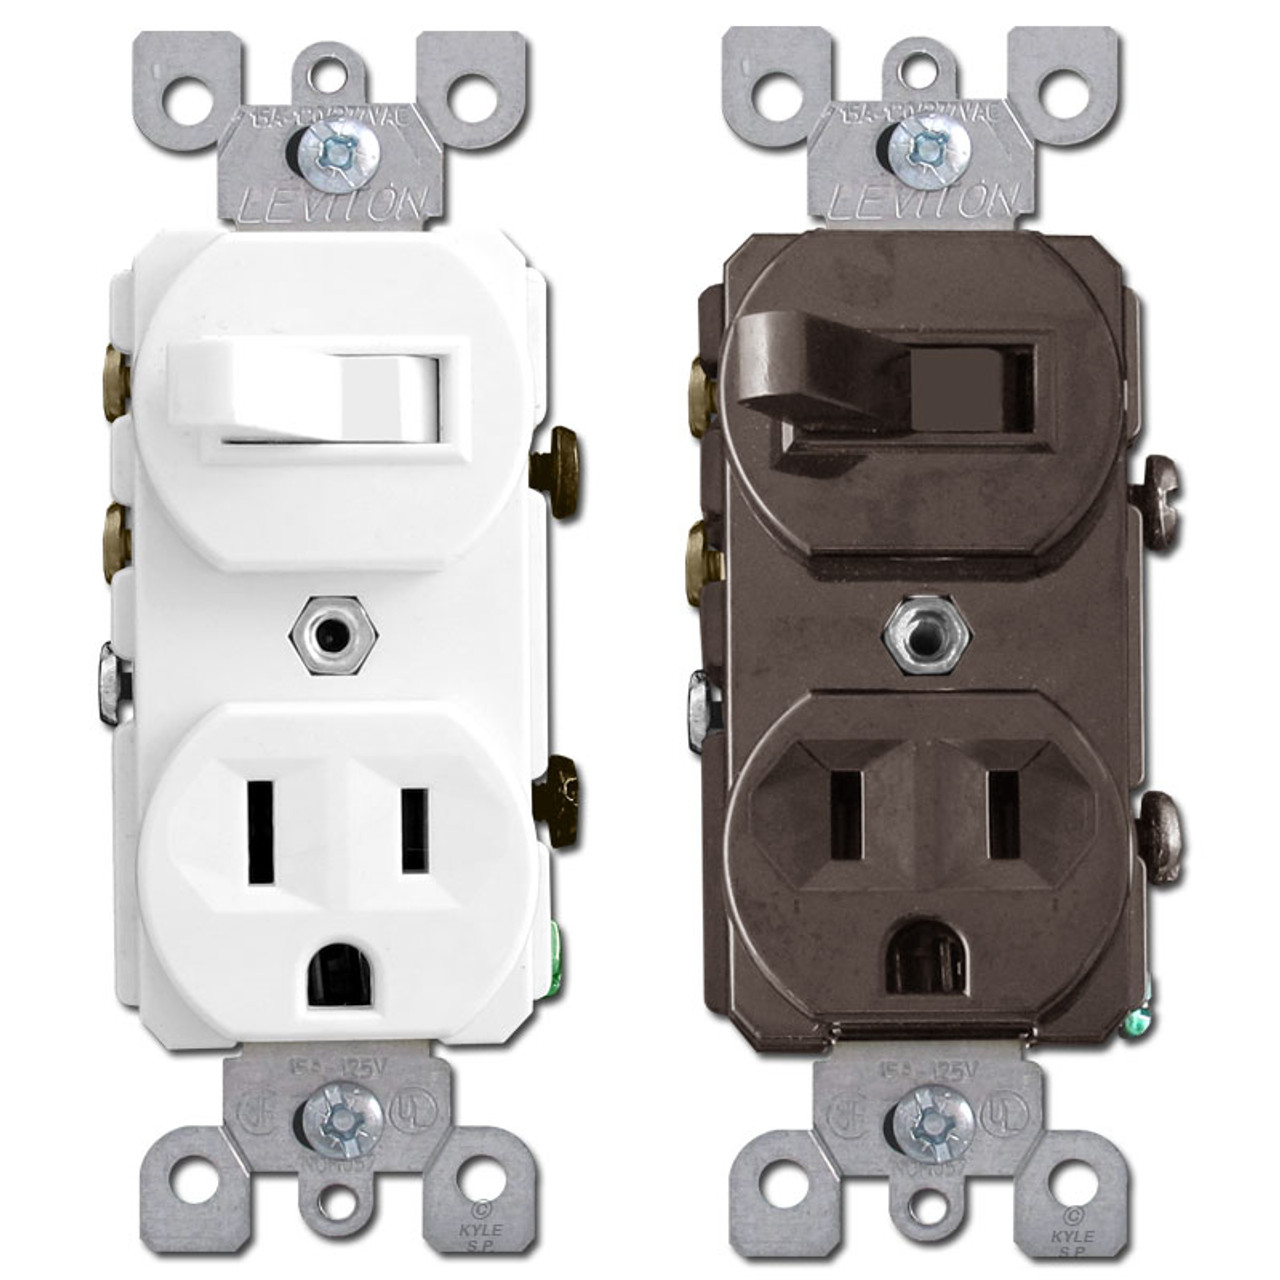 https://cdn11.bigcommerce.com/s-wlejmk/images/stencil/1280x1280/products/5497/15881/3-way-duplex-toggle-switch-electrical-outlet-15A-leviton-lev-5245-all__31204.1479327402.jpg?c=2